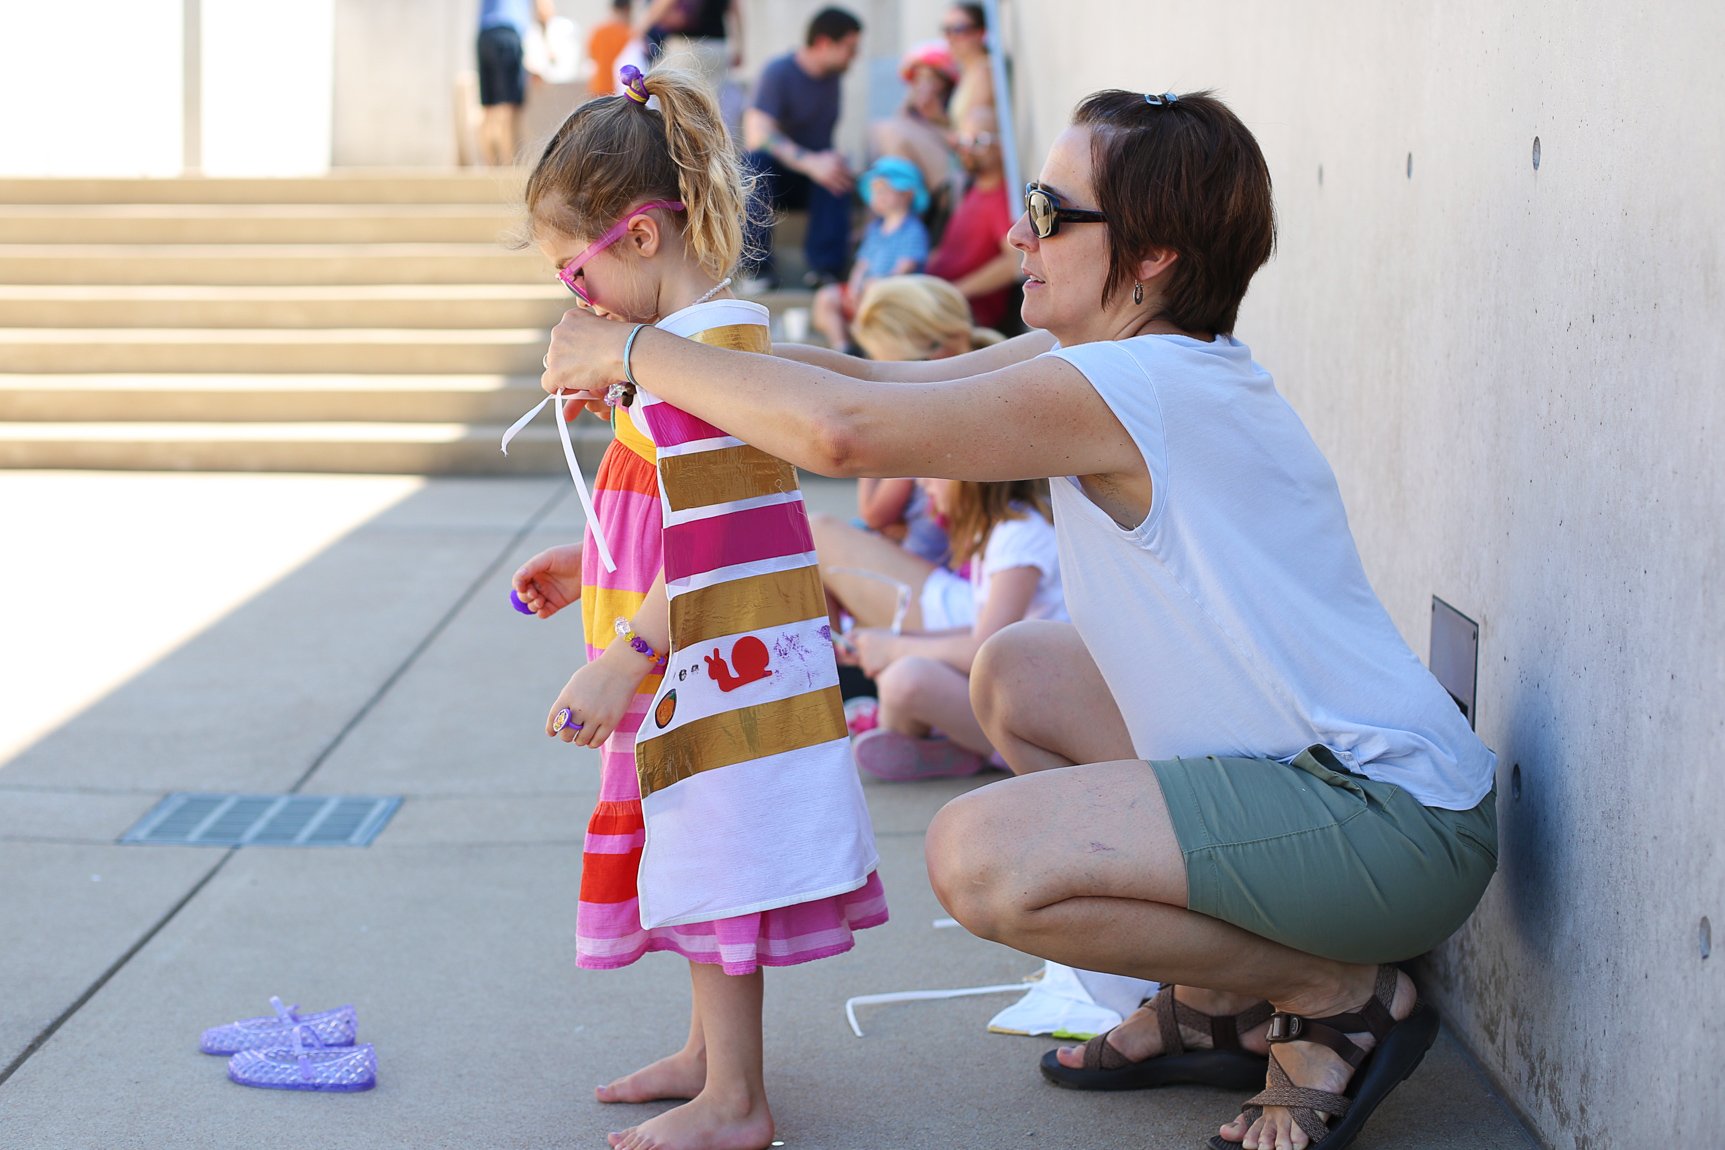 A parent ties a handmade cape around their child in the Courtyard.